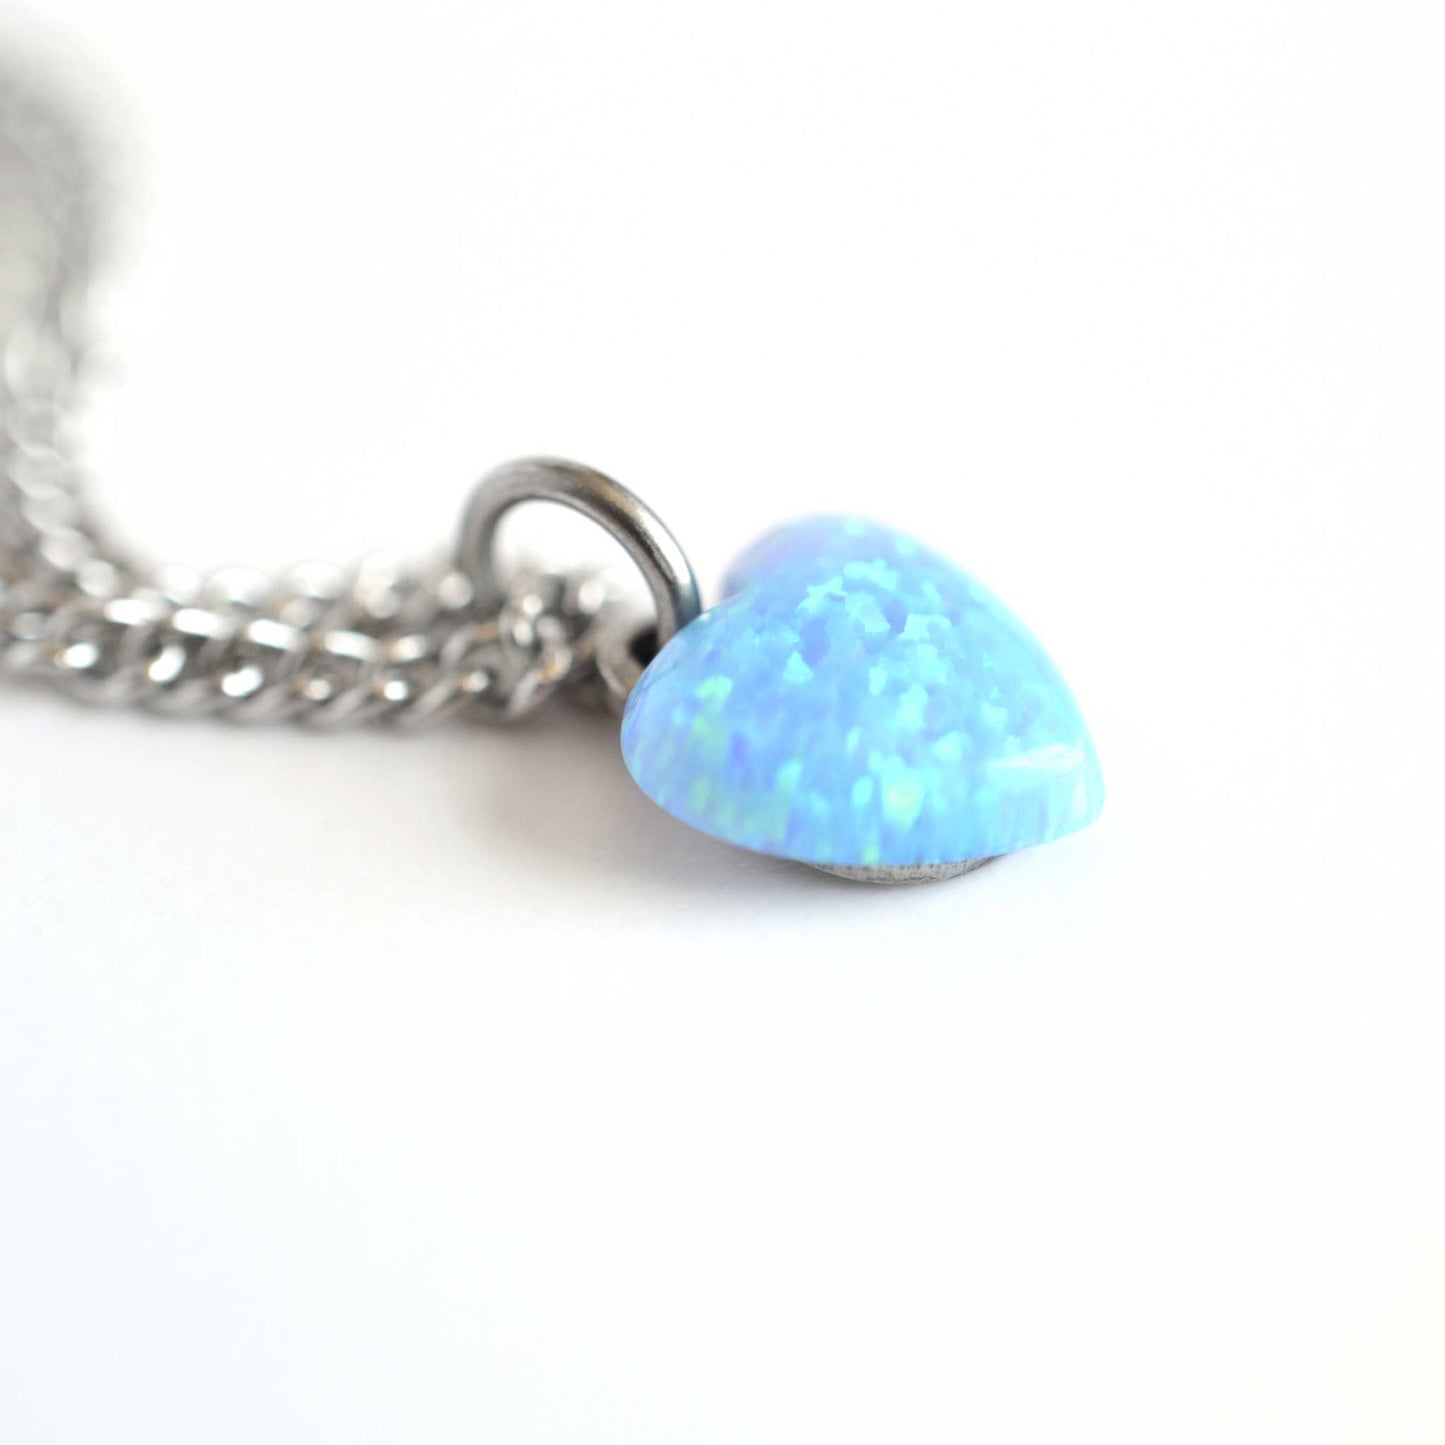 Close up of blue lab created Opal heart pendant hanging from stainless steel chain